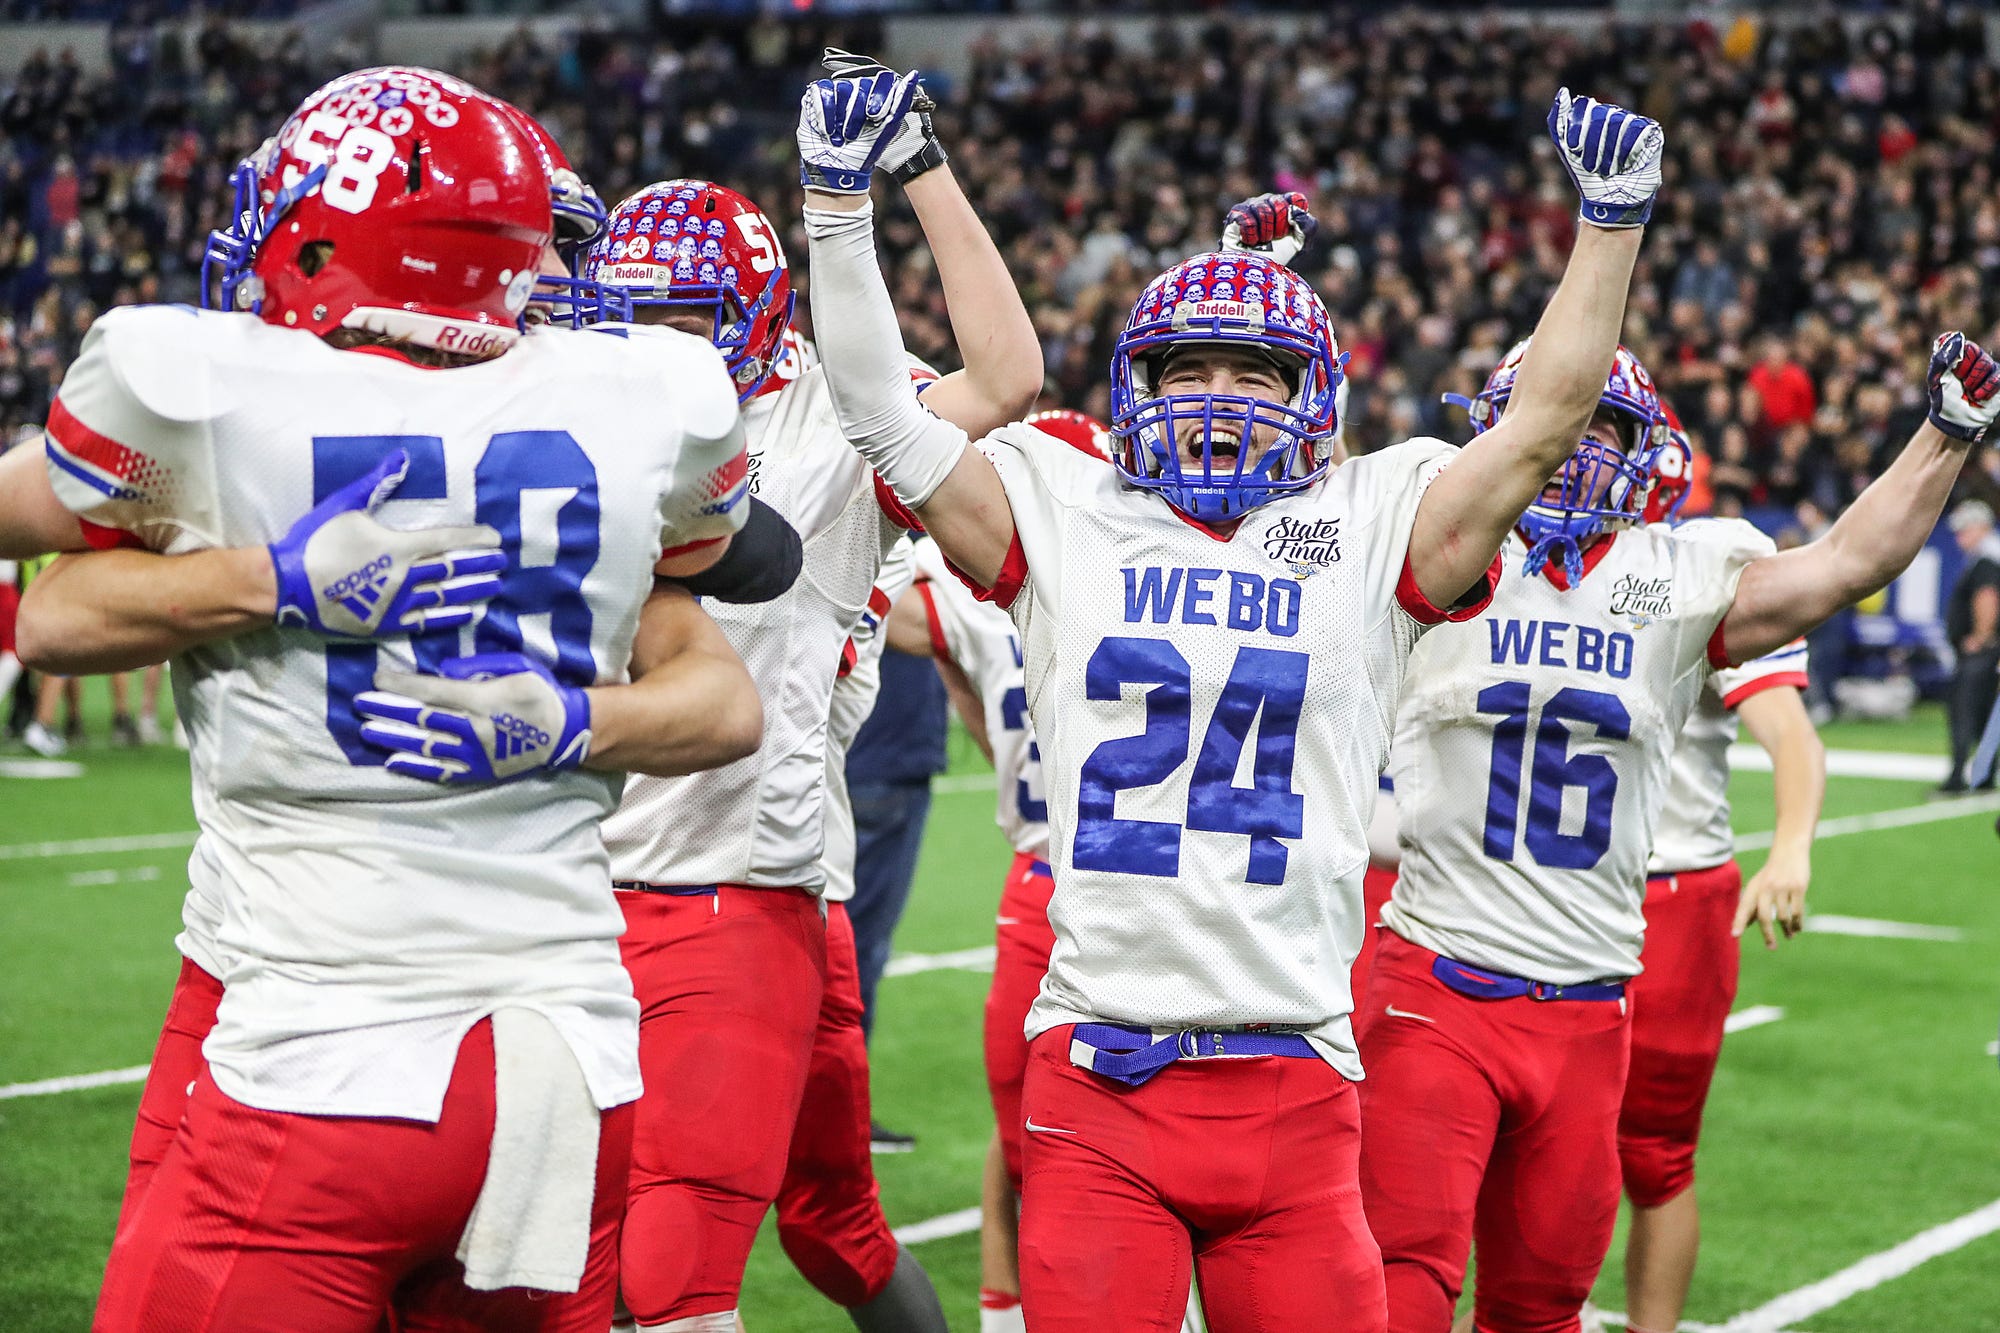 Indiana high school football: Western Boone wins Class 2A state title